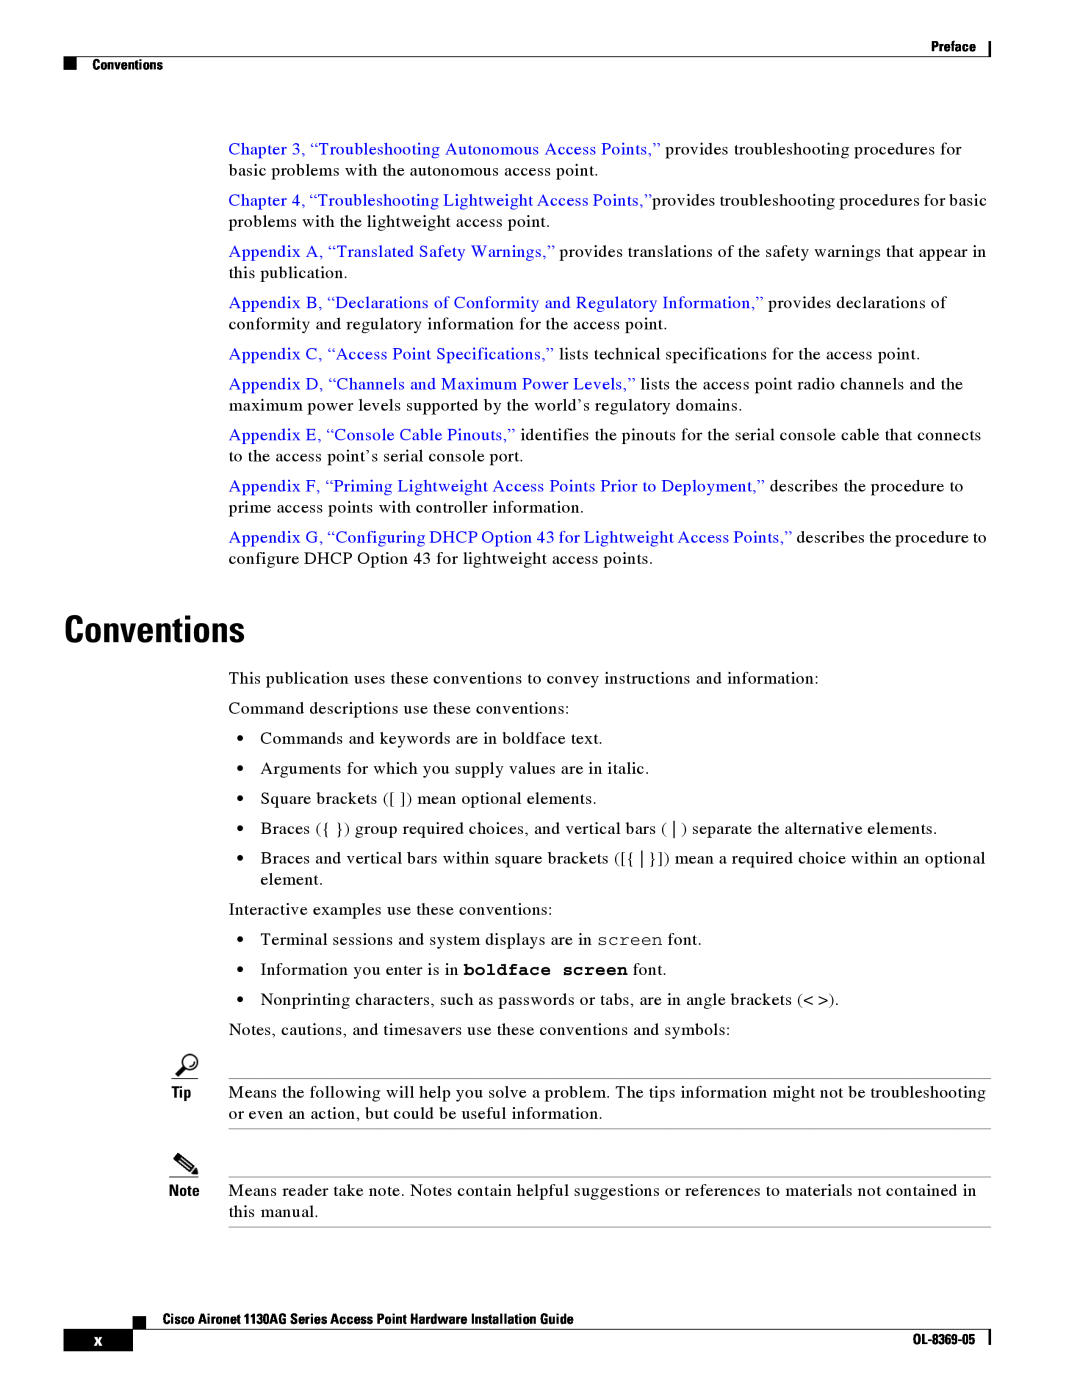 Cisco Systems 1130AG manual Conventions 